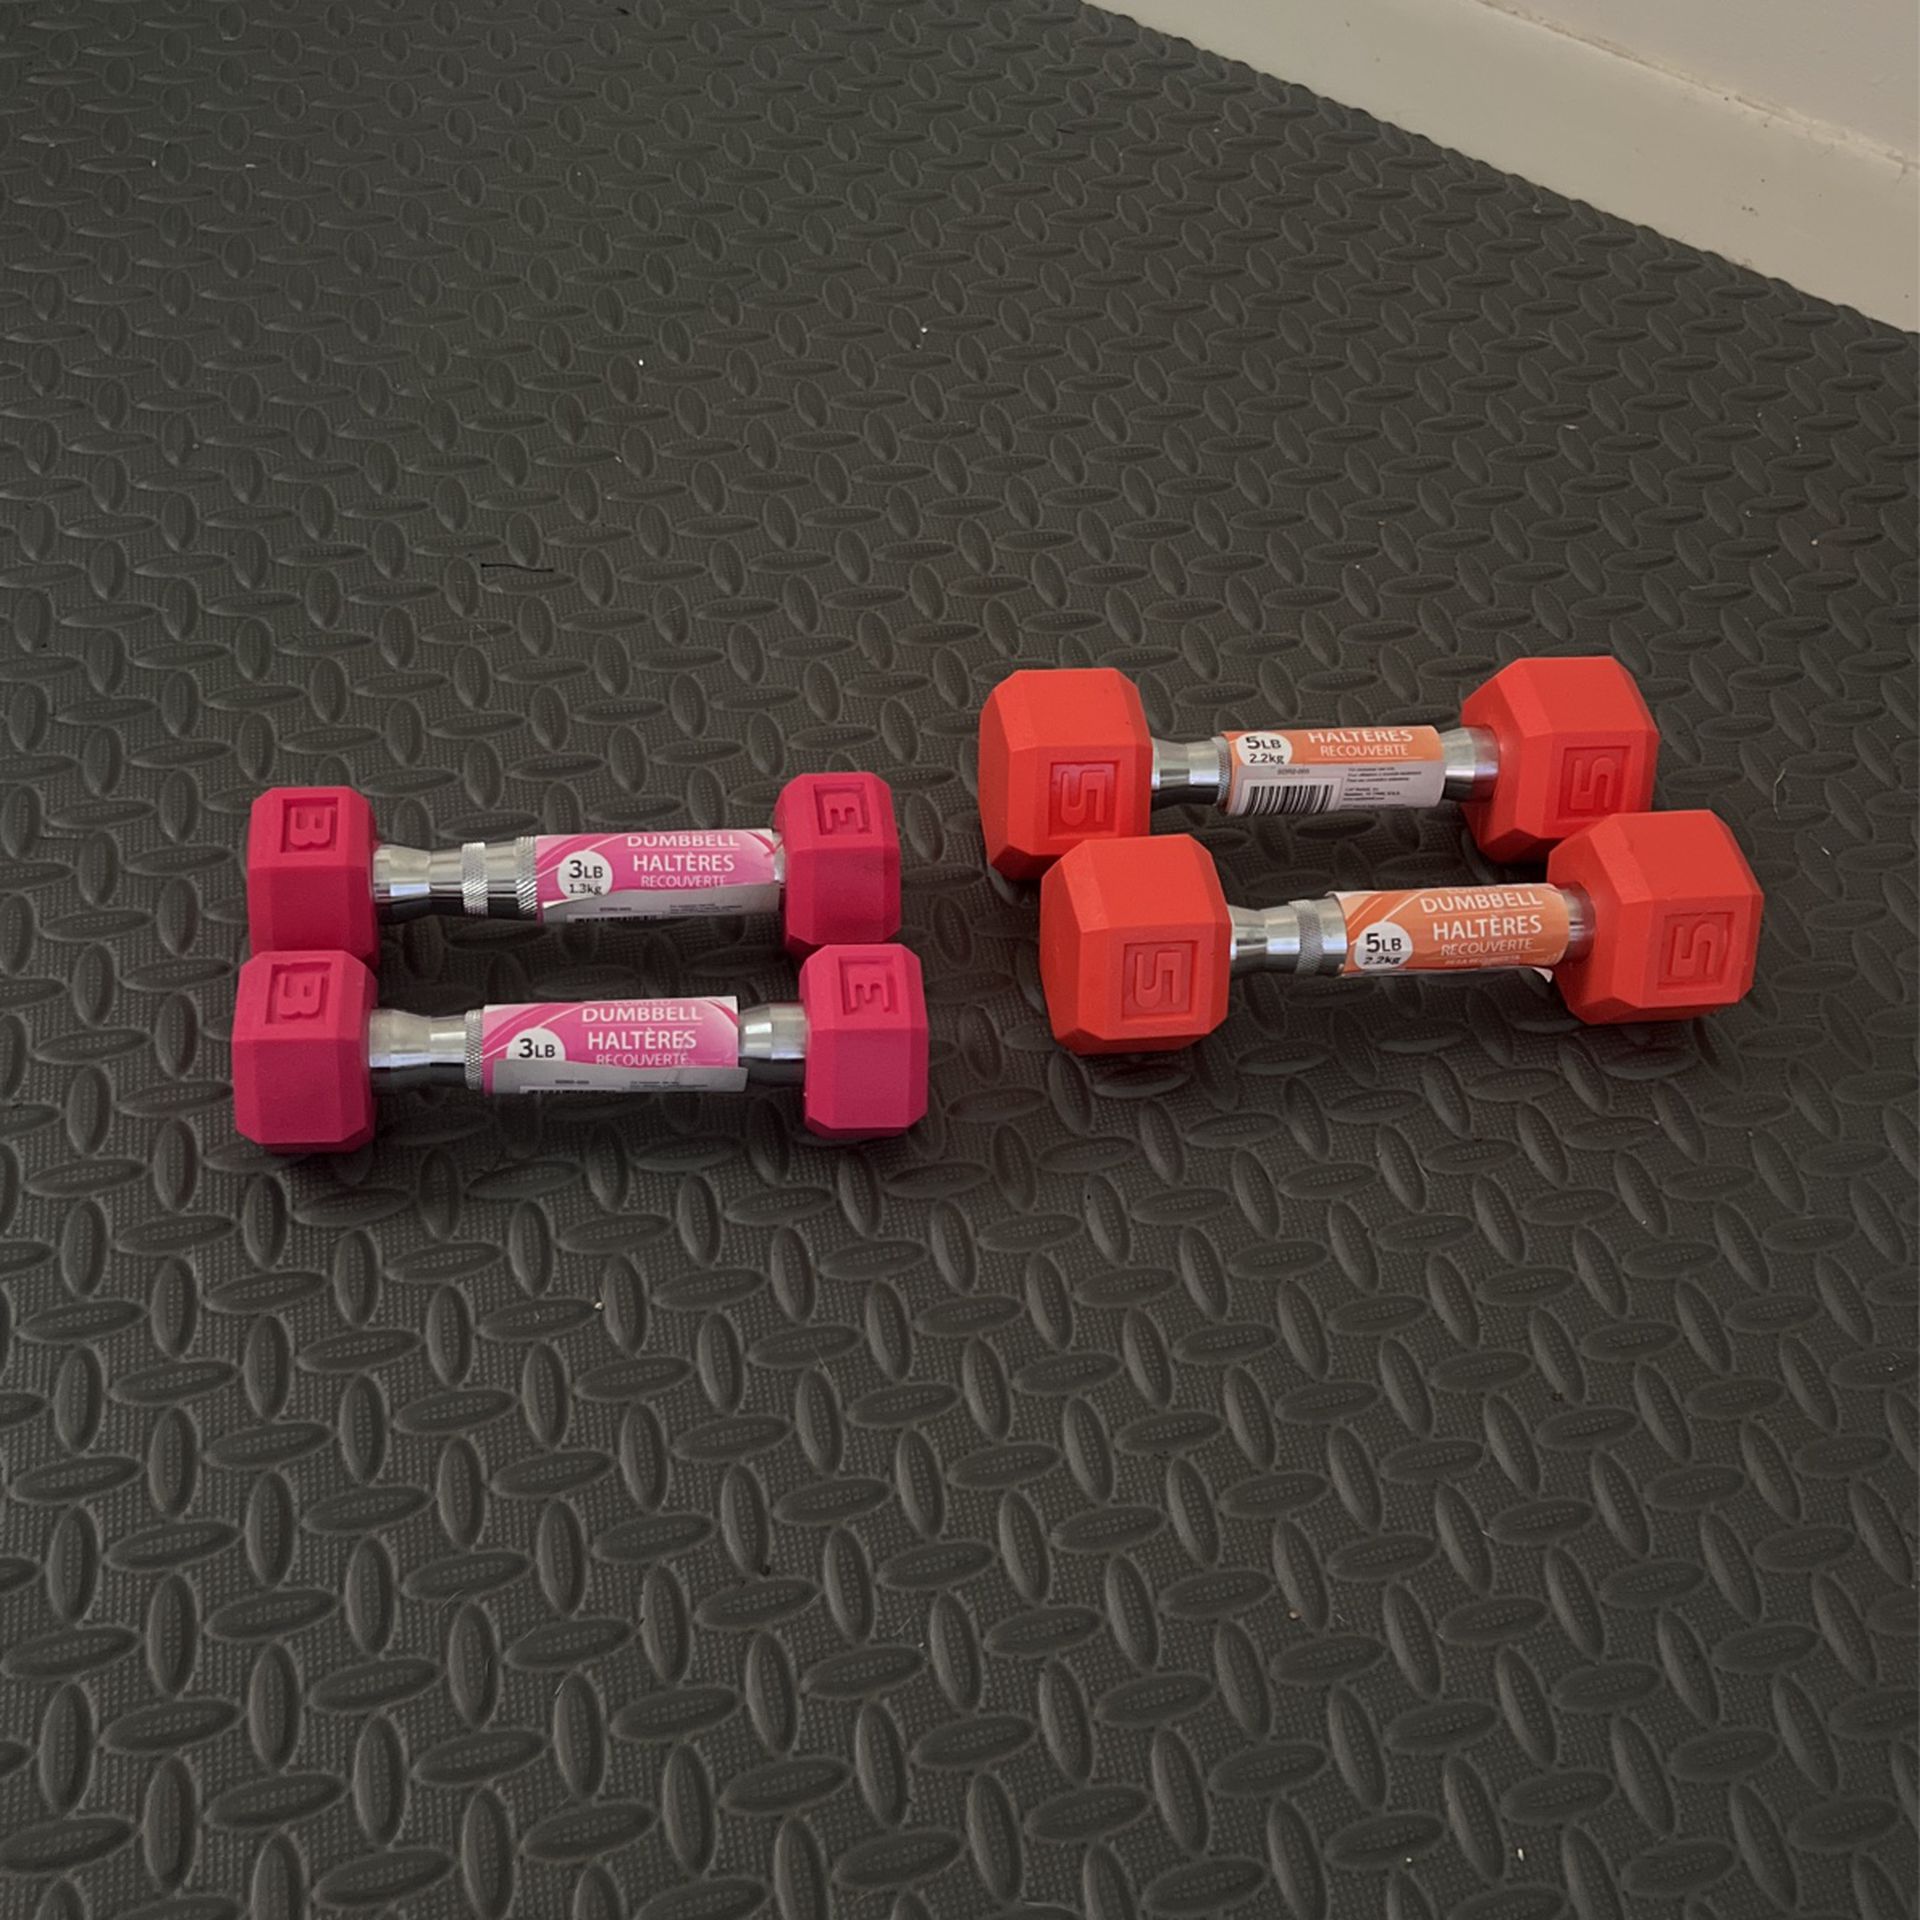 BRAND NEW pair of 5lb AND pair of 3lb Dumbbells 